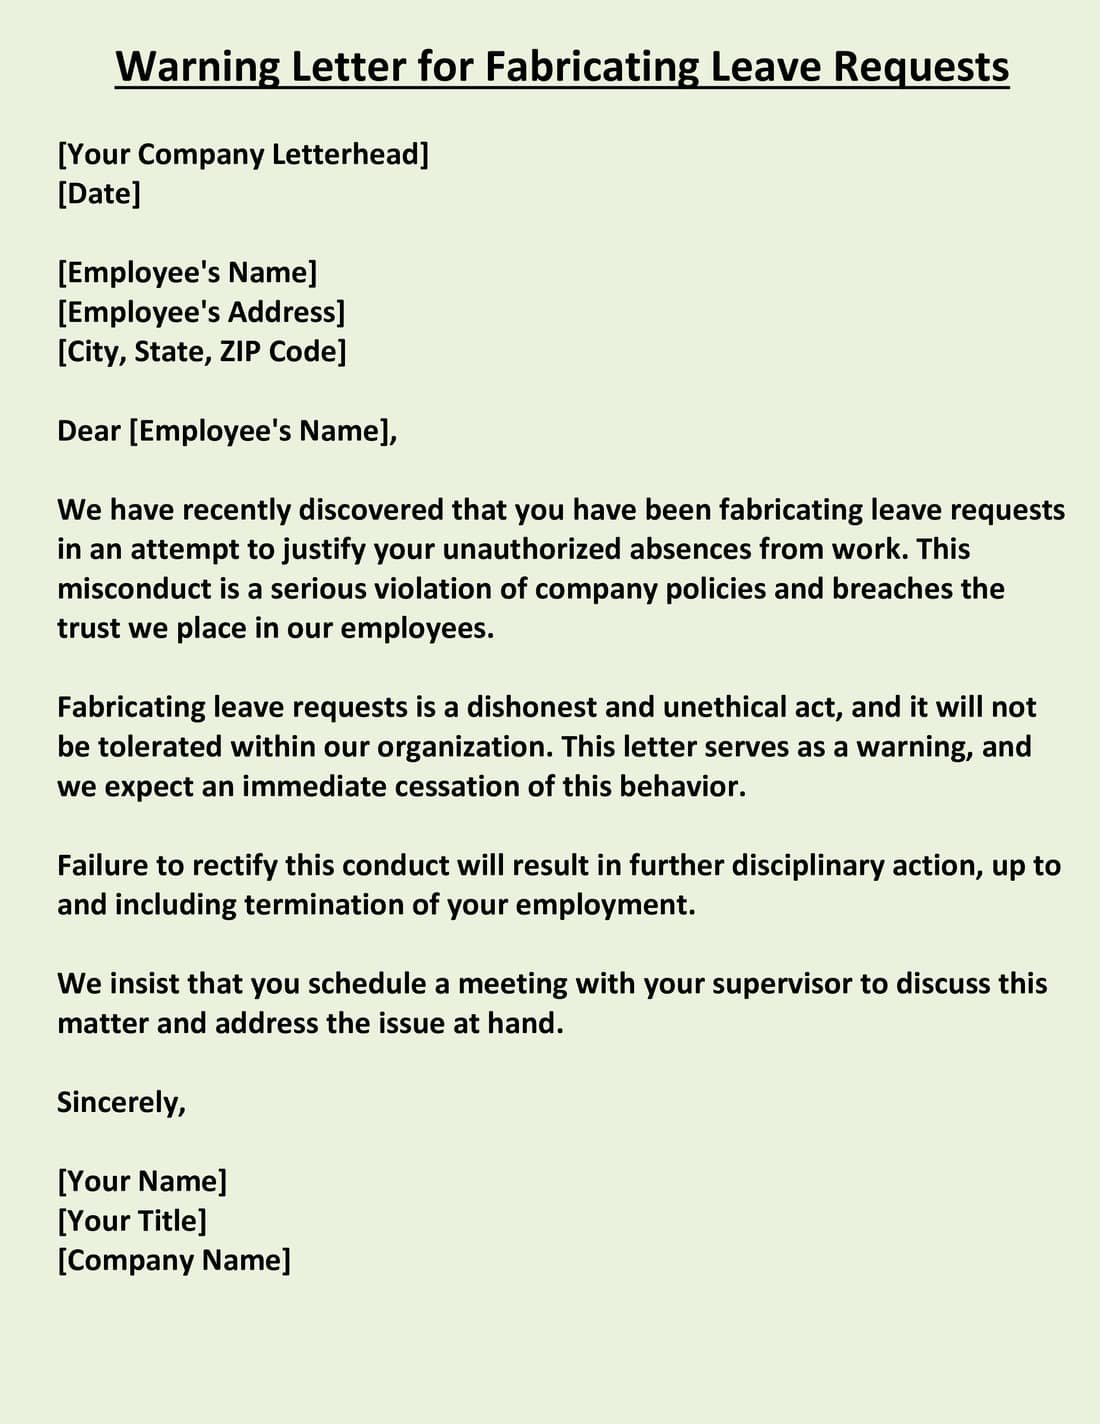 Warning Letter for Fabricating Leave Requests